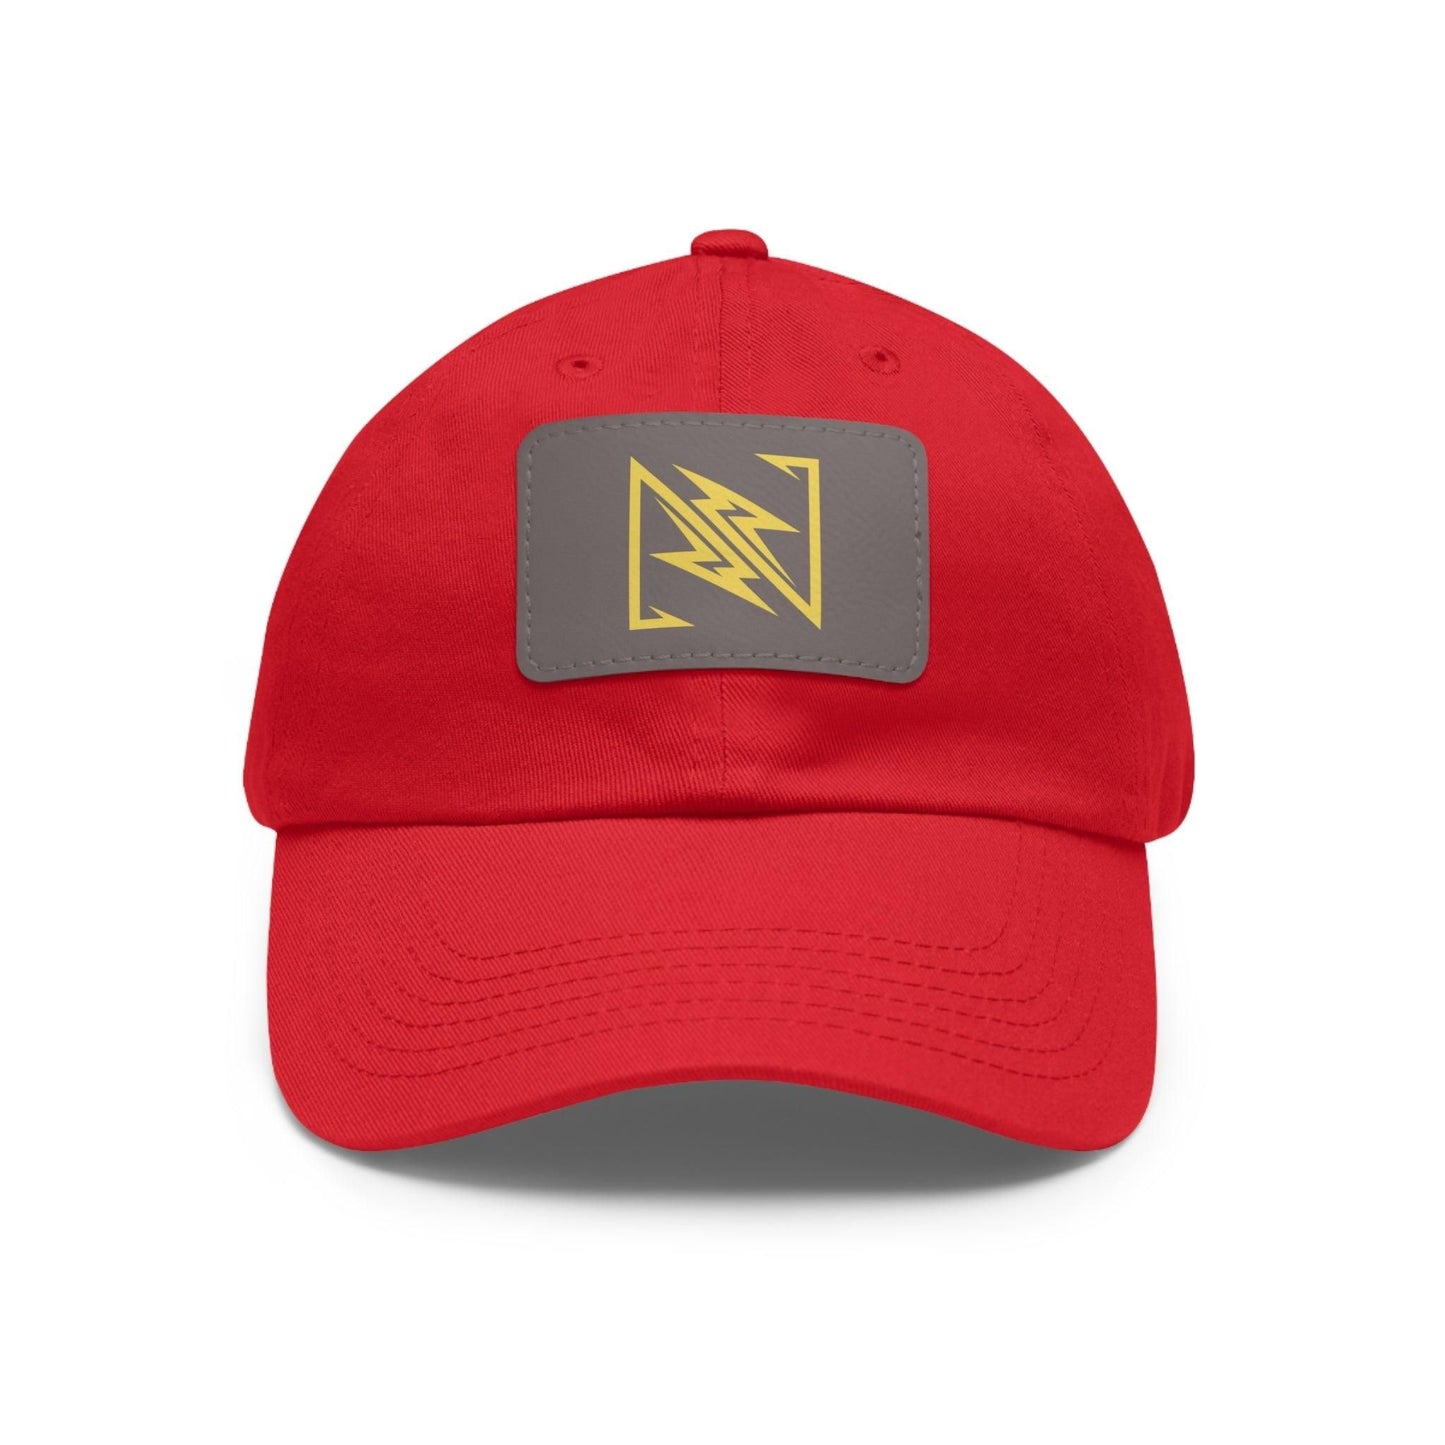 NX Vogue Premium Baseball Hat with Leather Patch Cap Red / Grey patch Rectangle One size